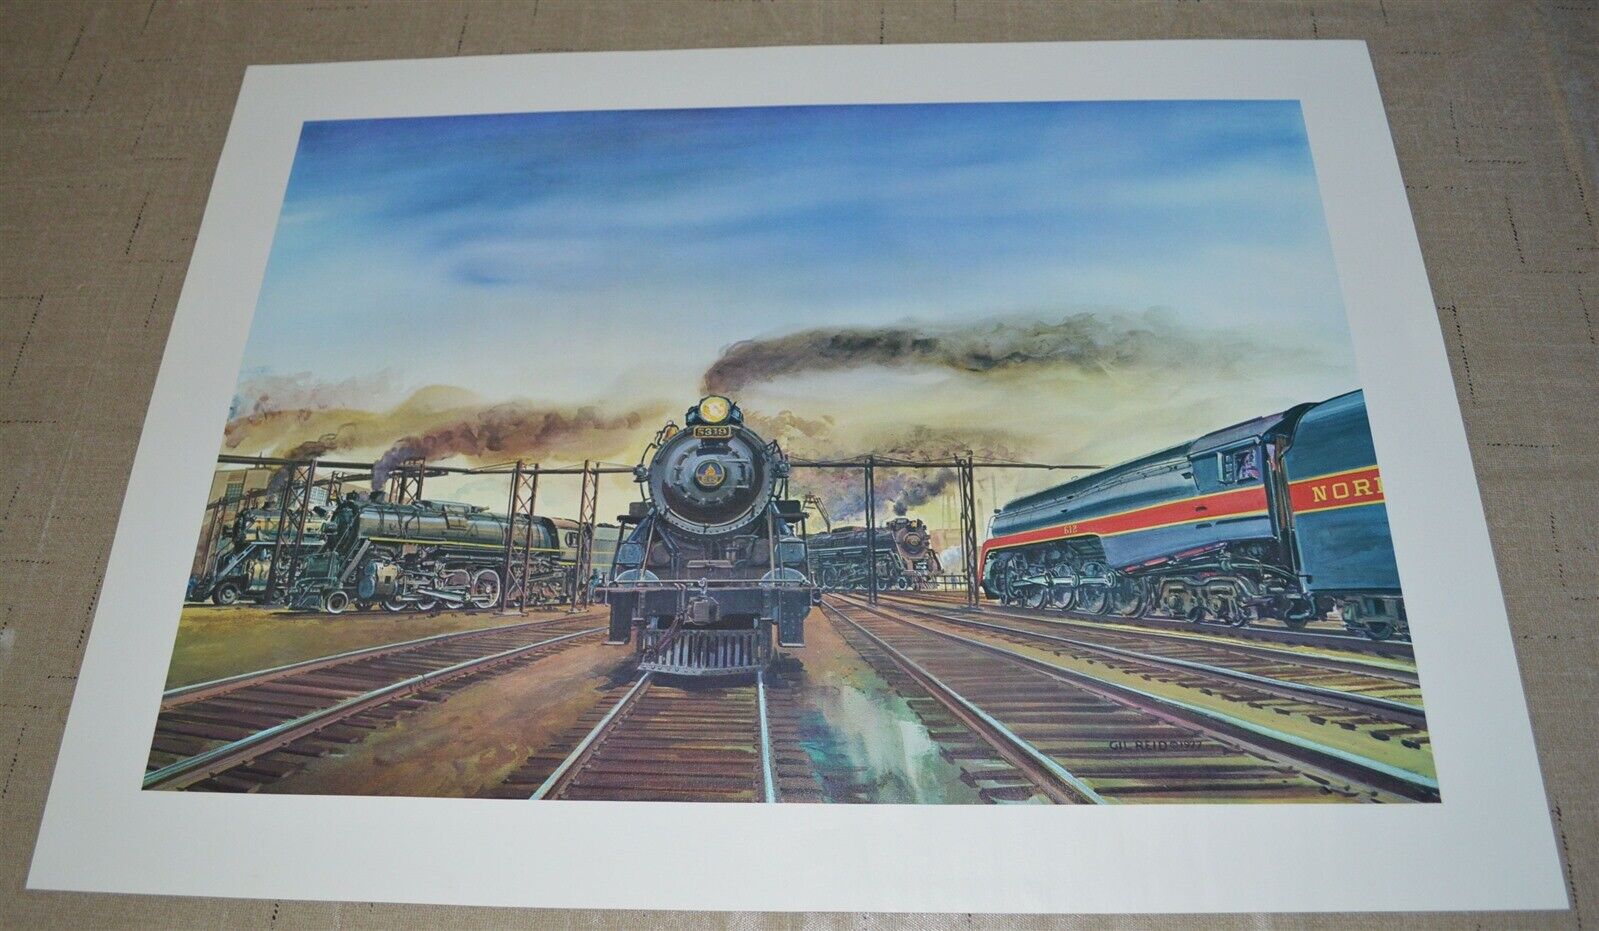 Baltimore & Ohio Railroad Poster Print Steam Engine #5319 Other Engines By Reid